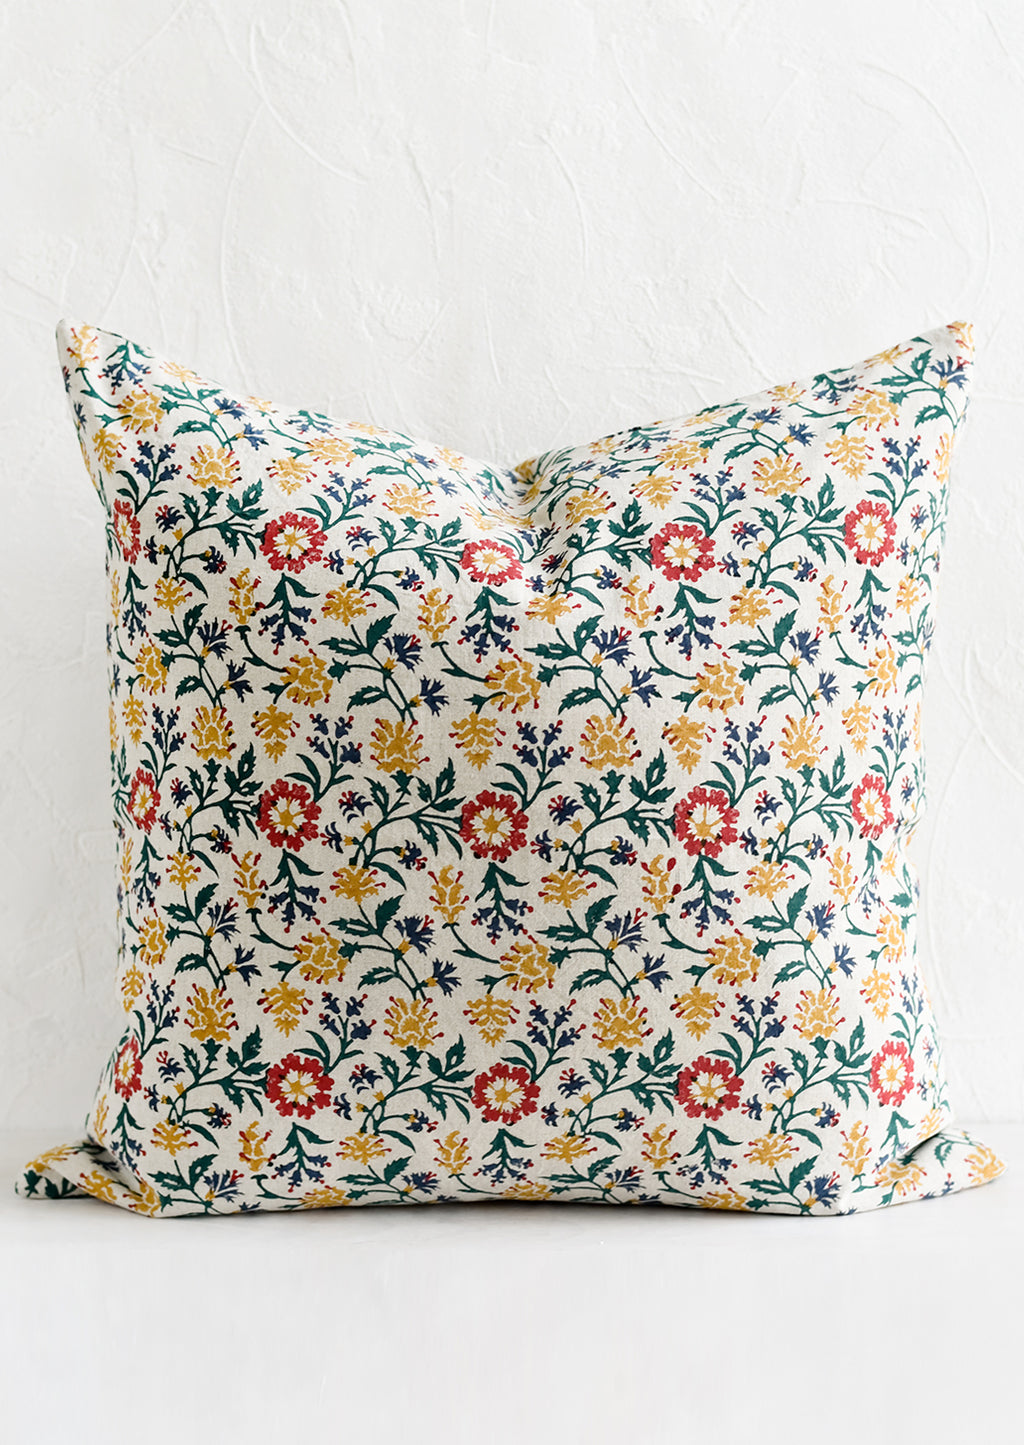 1: A block printed pillow in green, red, blue and yellow floral print.